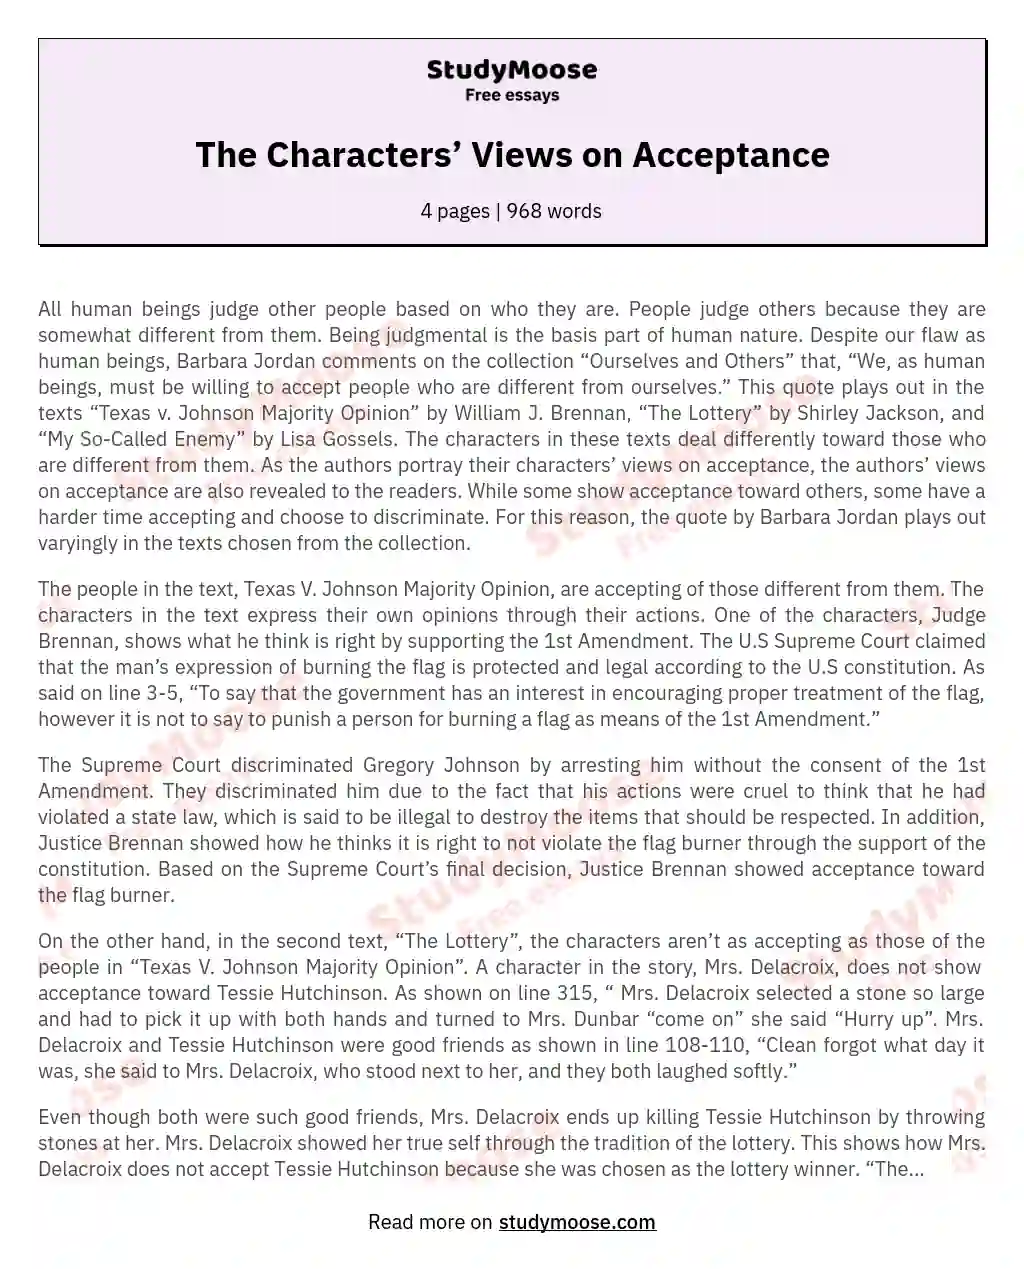 The Characters’ Views on Acceptance essay